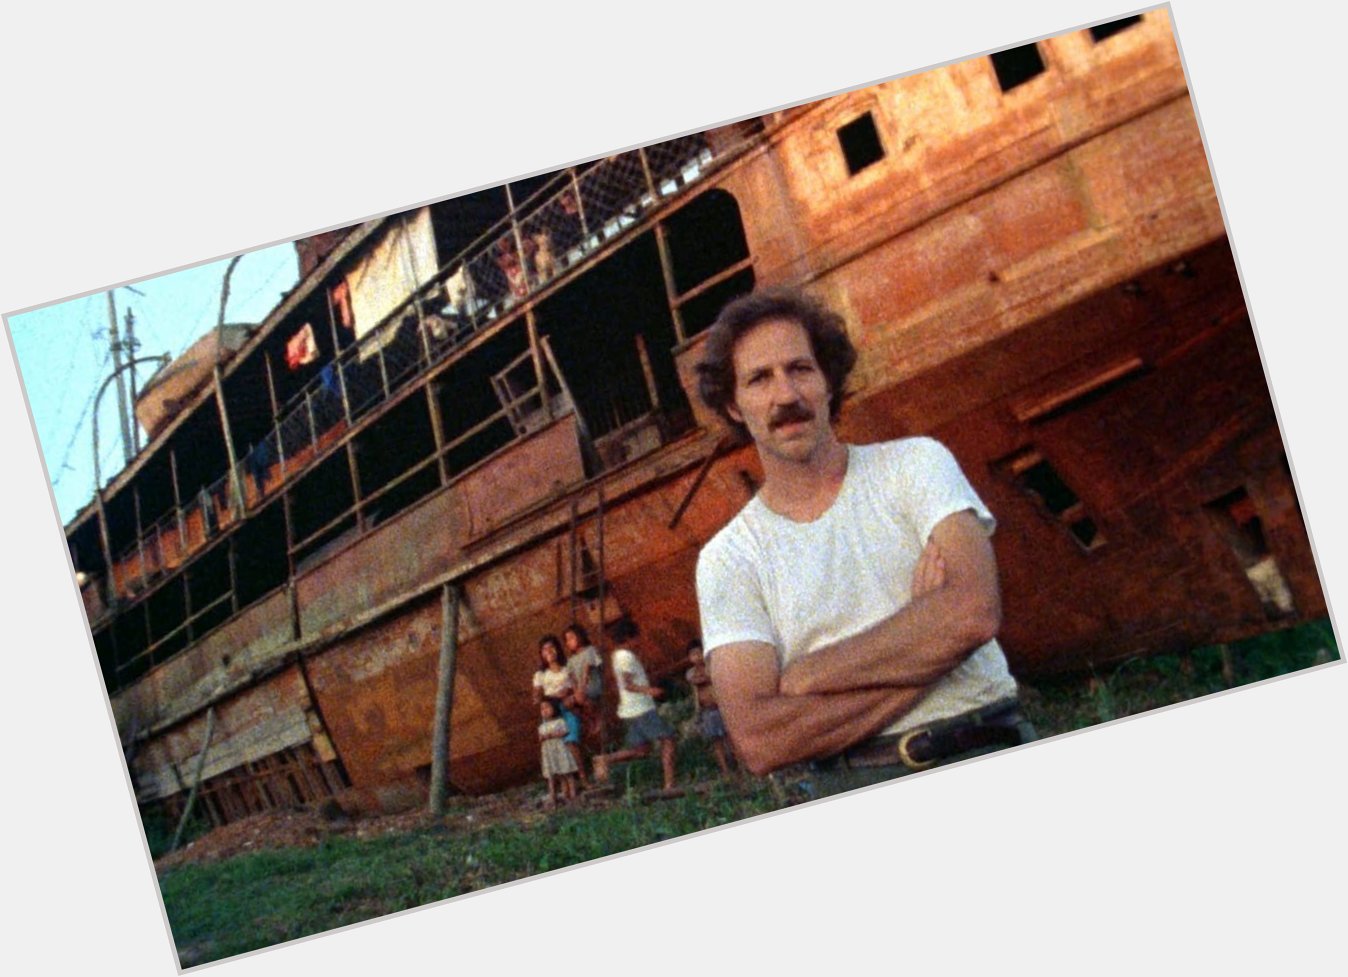 Happy 80th birthday to the one, the only, Werner Herzog 